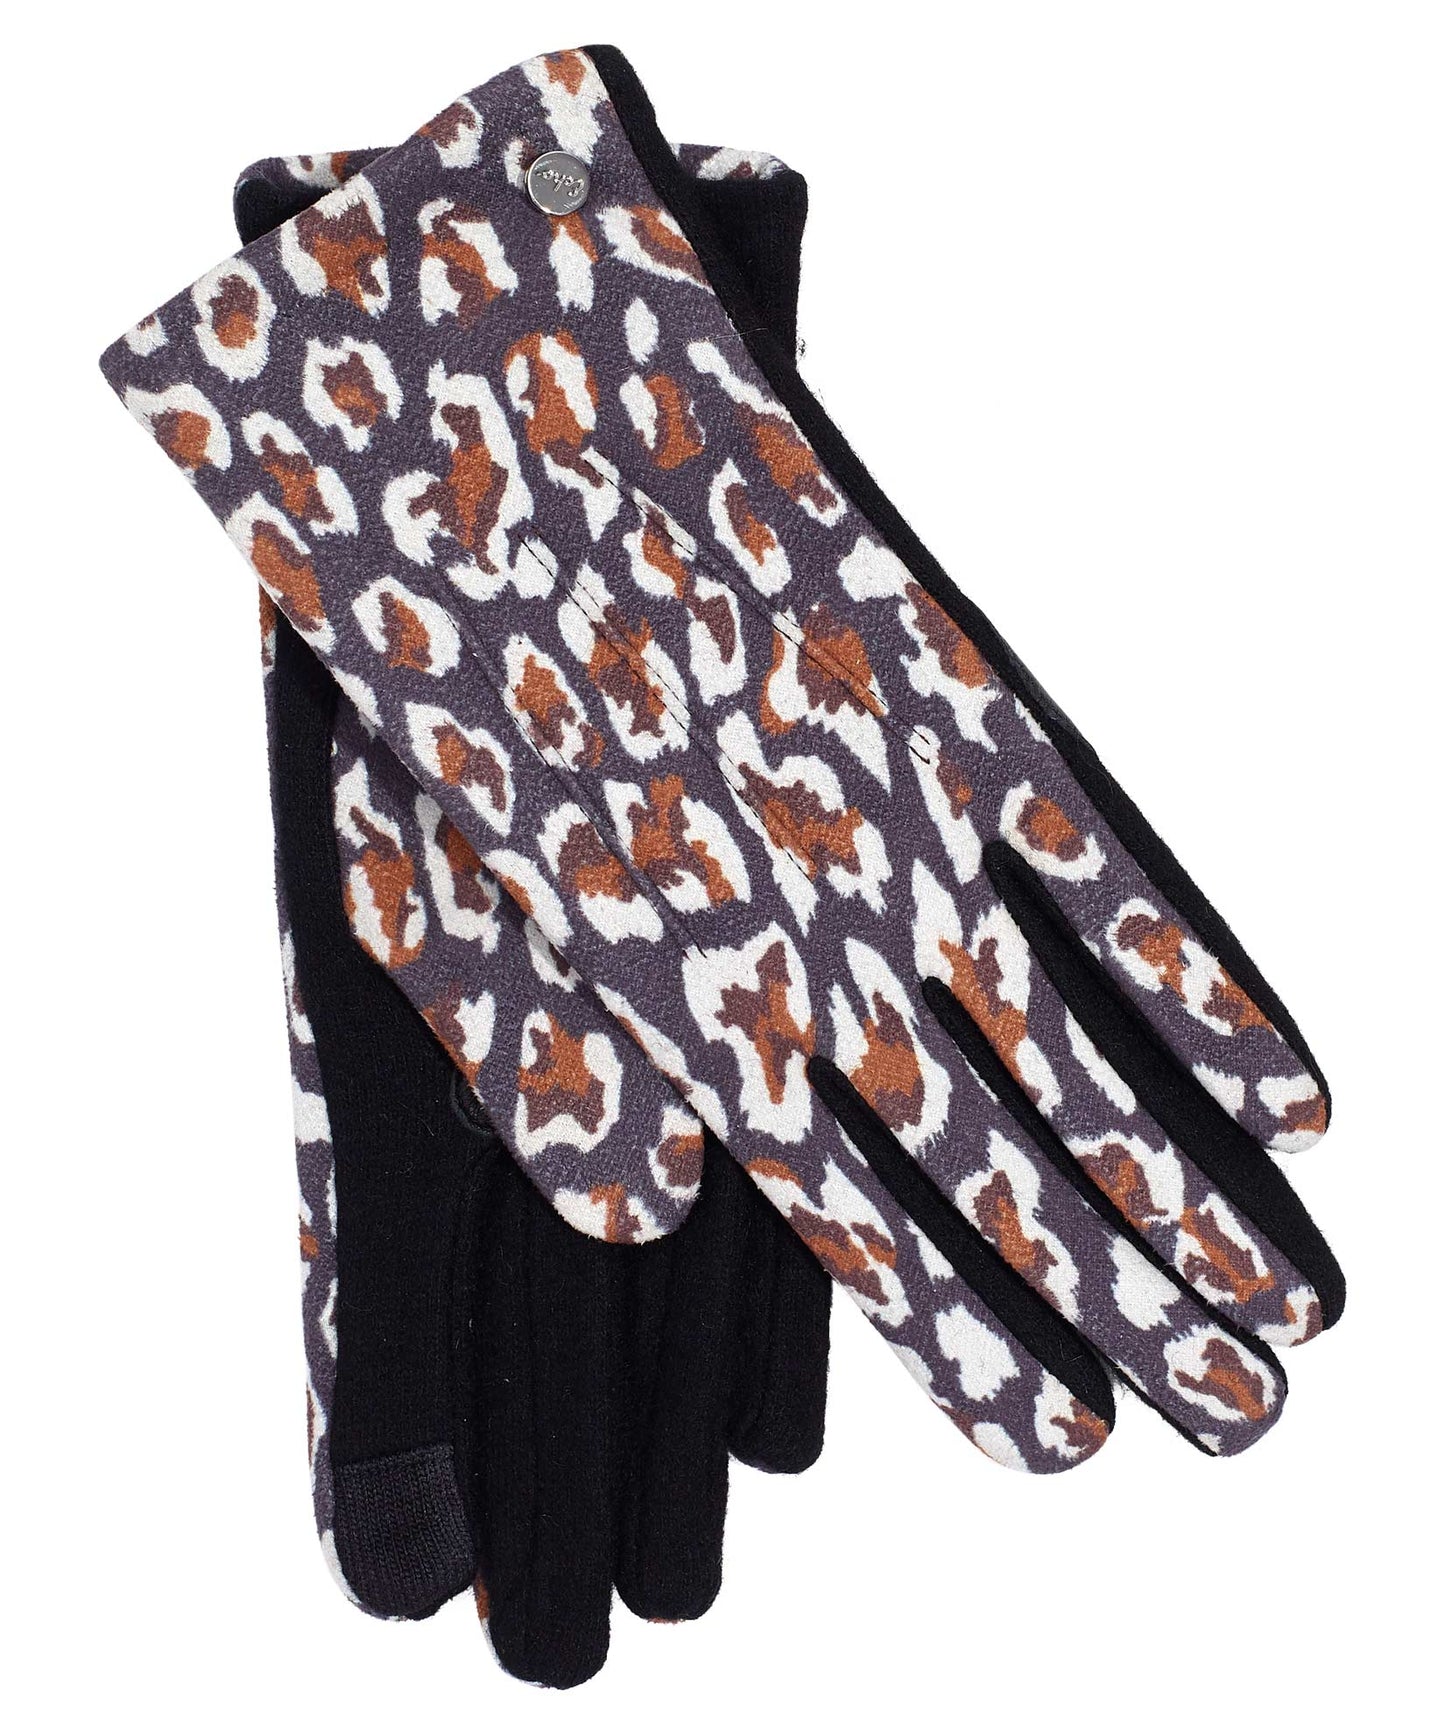 Cheetah Print Classic Touch Glove in color Dark Brown